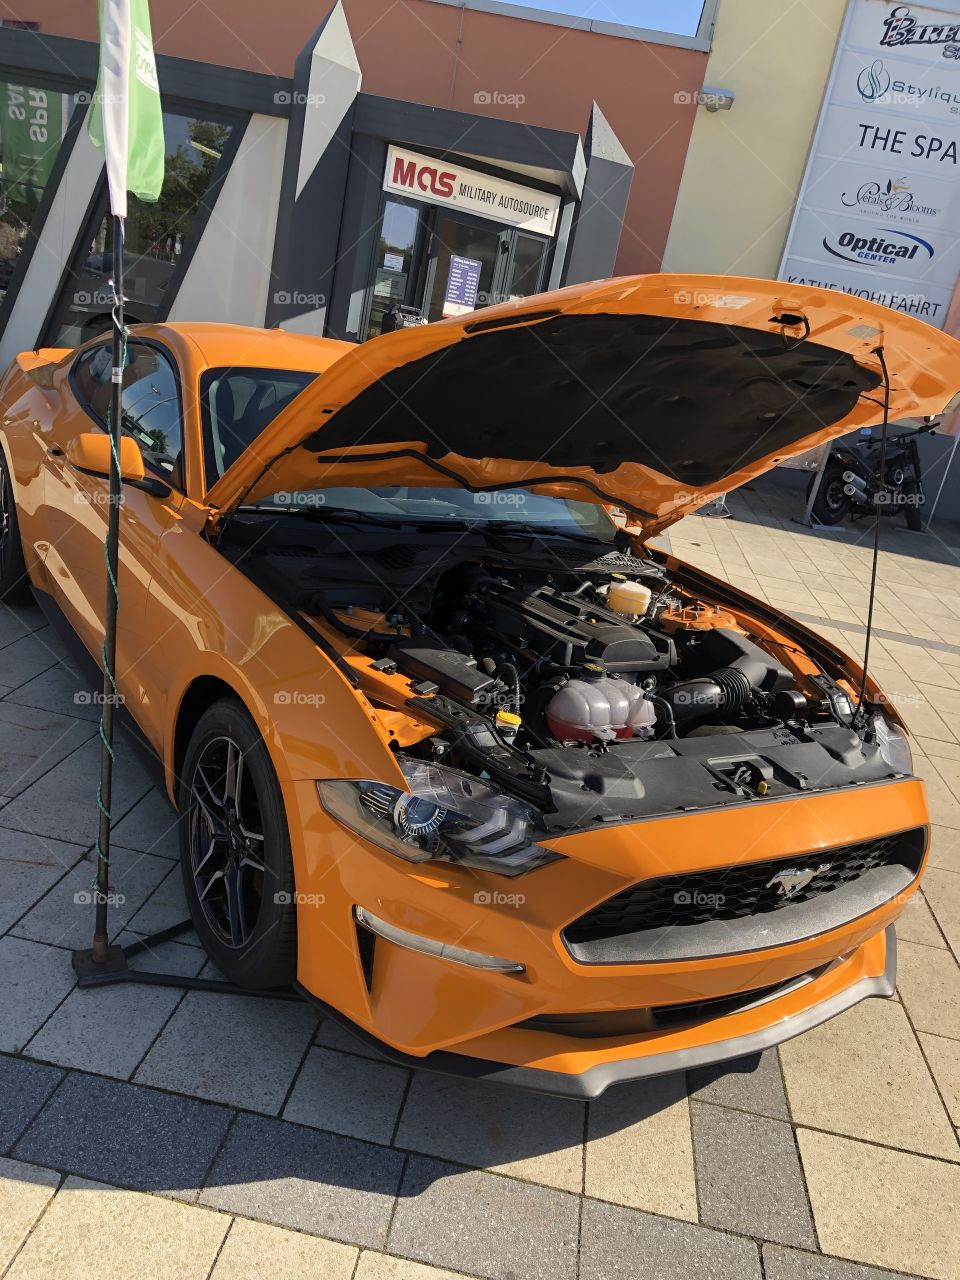 This mustang was outside a shopping mall in America , very beautiful and orange I must say.